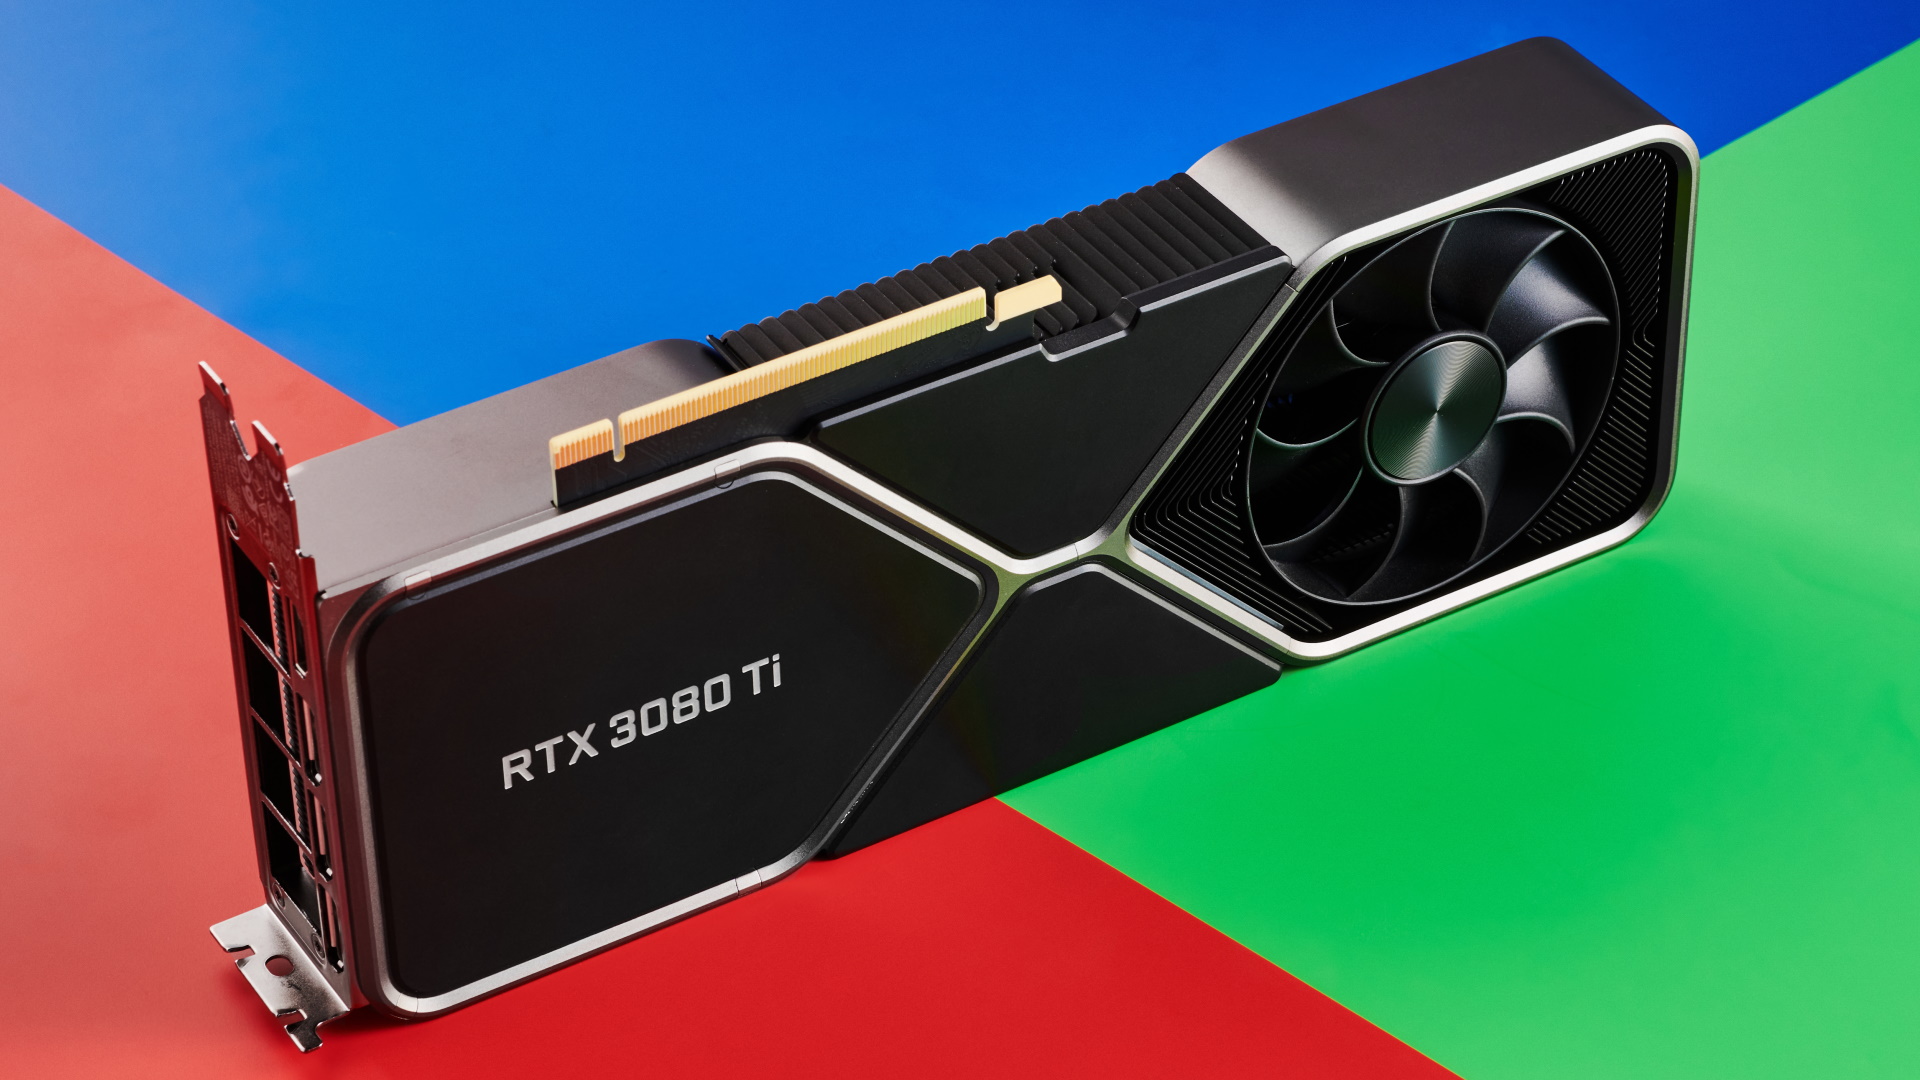 Nvidia GeForce RTX 3080 Ti on a bright background.